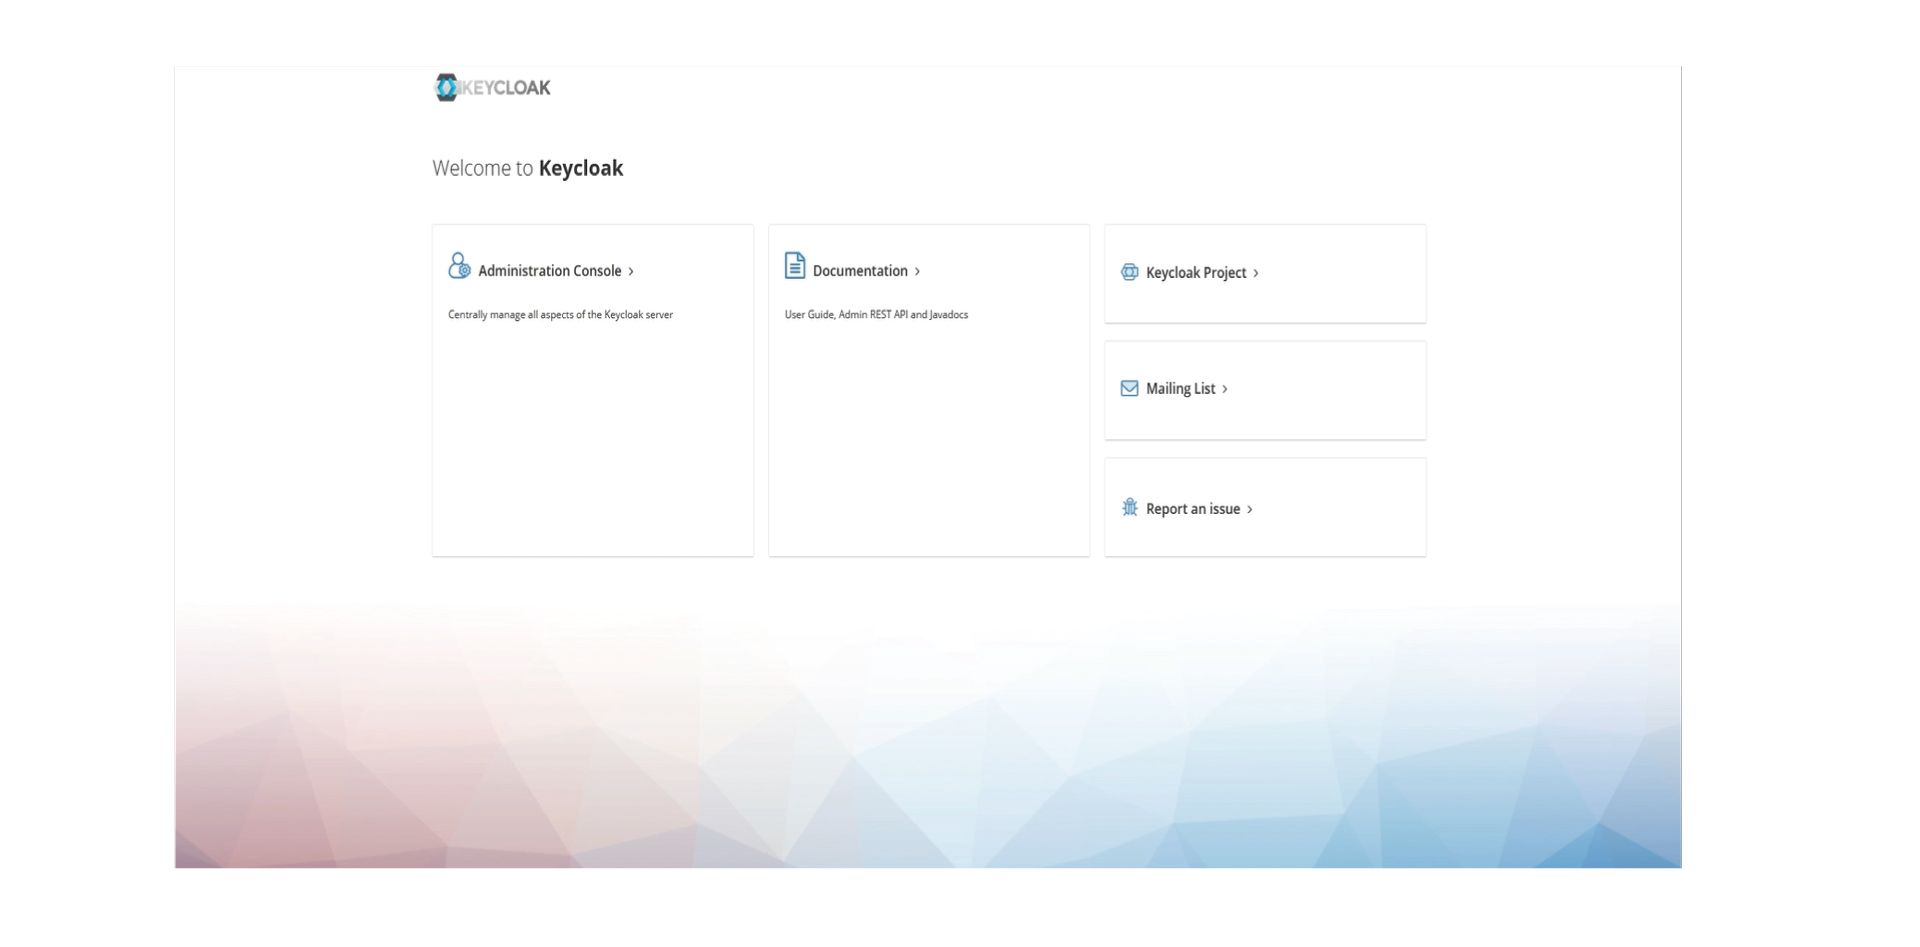 The image shows the welcome screen of the Keycloak web application. It displays the Keycloak logo at the top, followed by the greeting "Welcome to Keycloak". Below are four options presented as cards: "Administration Console" with a subtitle "Centrally manage all aspects of the Keycloak server", "Documentation" offering "User Guide, Admin REST API and Javadocs", "Keycloak Project" leading to more information about the project, and "Mailing List" to subscribe to updates. The last card, "Report an issue", invites users to report problems. The layout is clean with a minimalist design against a soft, abstract background.